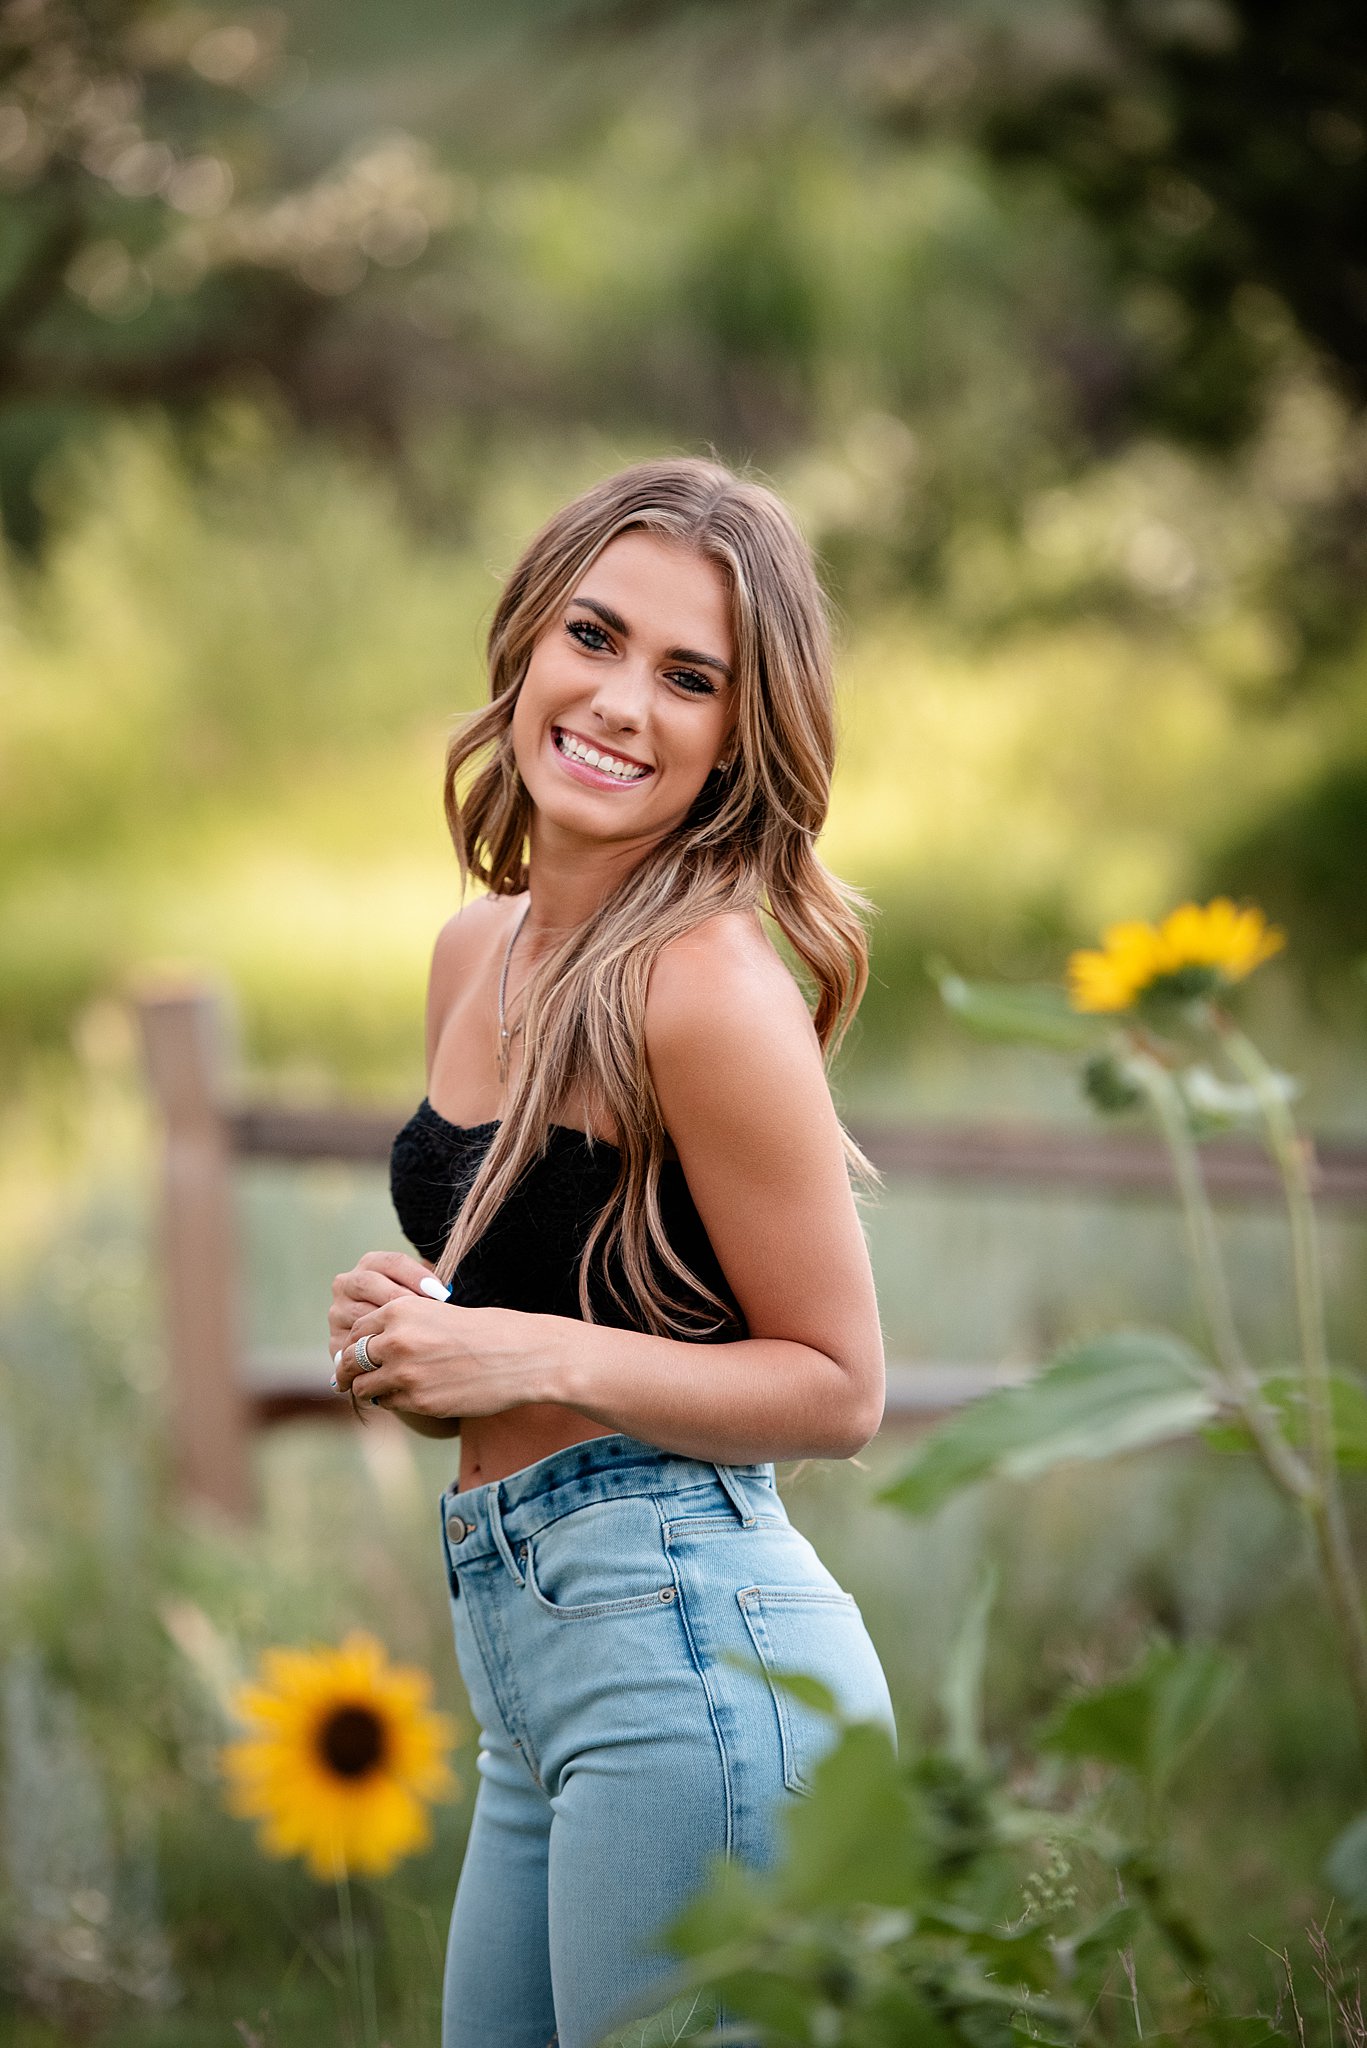 A high school senior smiles over her shoulder while walking through a garden with sunflowers